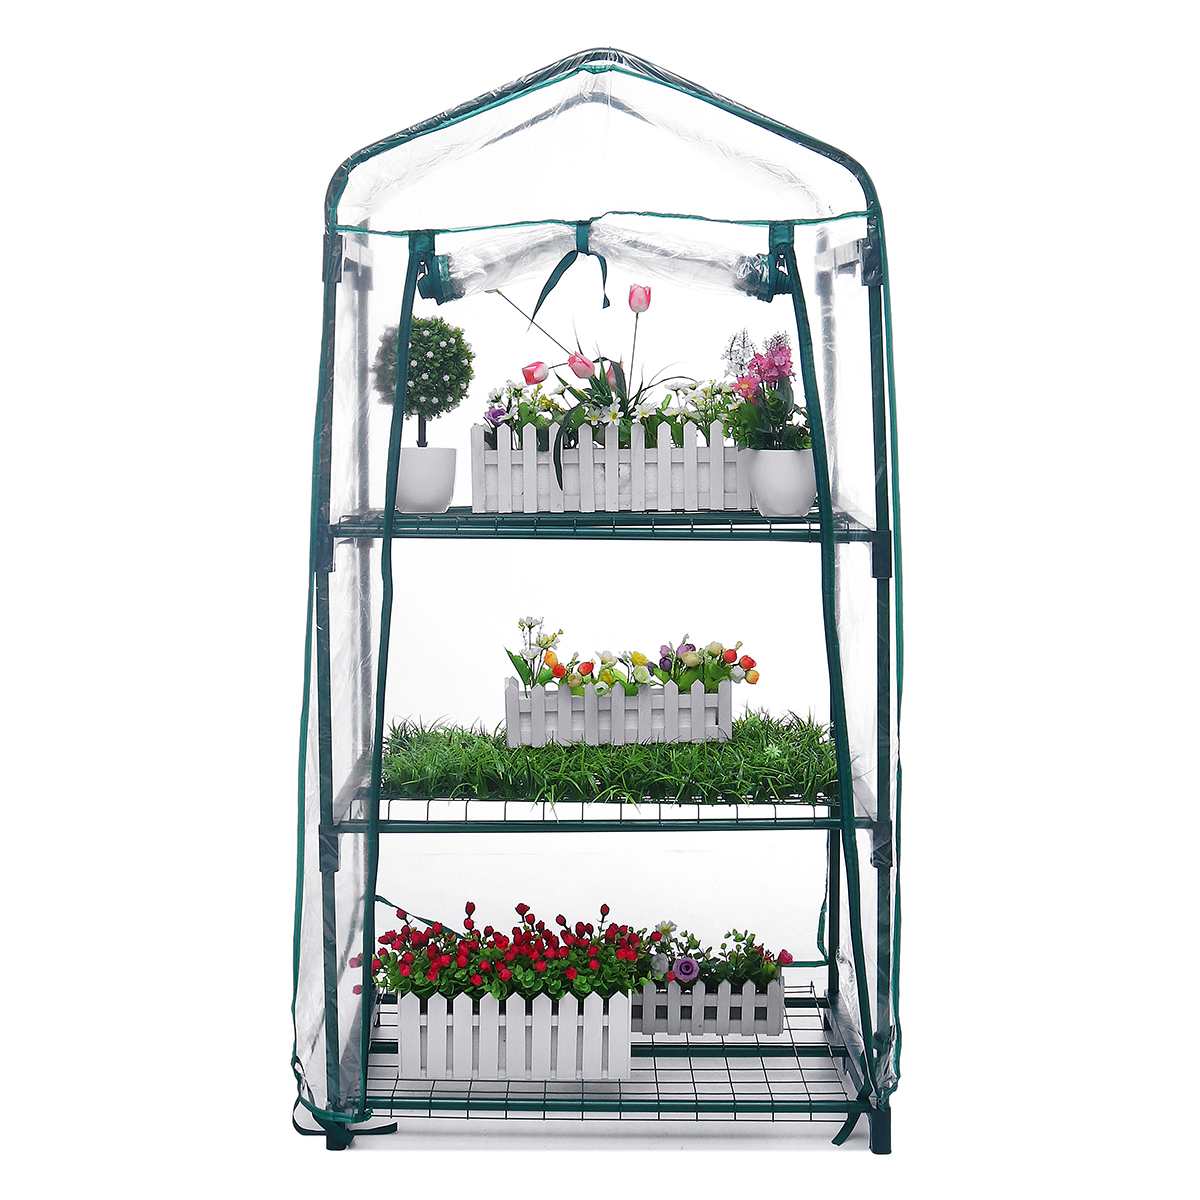 Mini Garden Greenhouse 3 Layers Home Outdoor Flowers Gardening Winter Plant Shelves Vegetables Warm Room Shelter 69x49x126cm